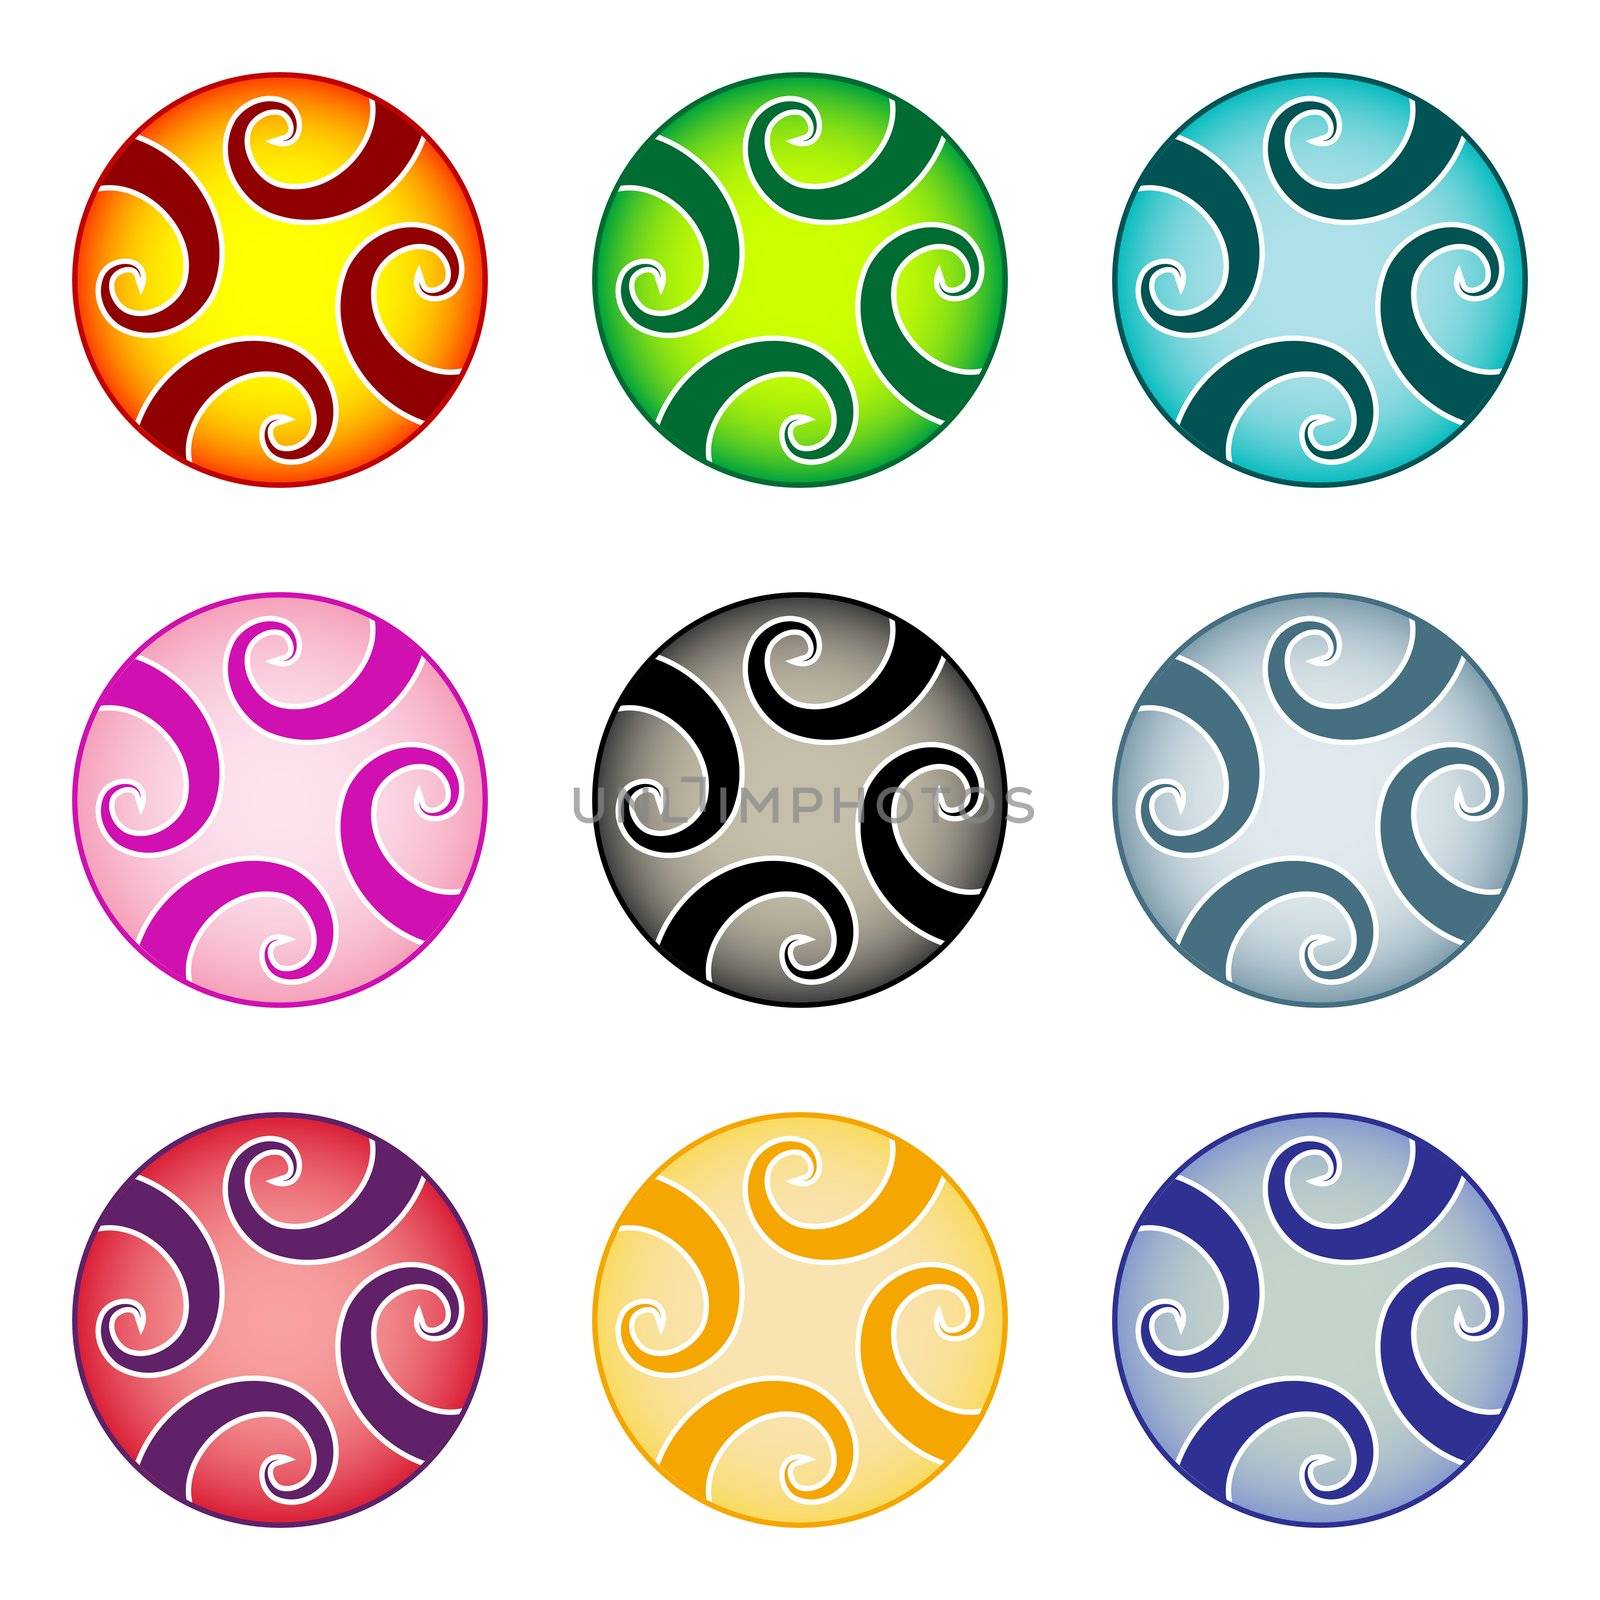 balls in colors against white background, abstract vector art illustration